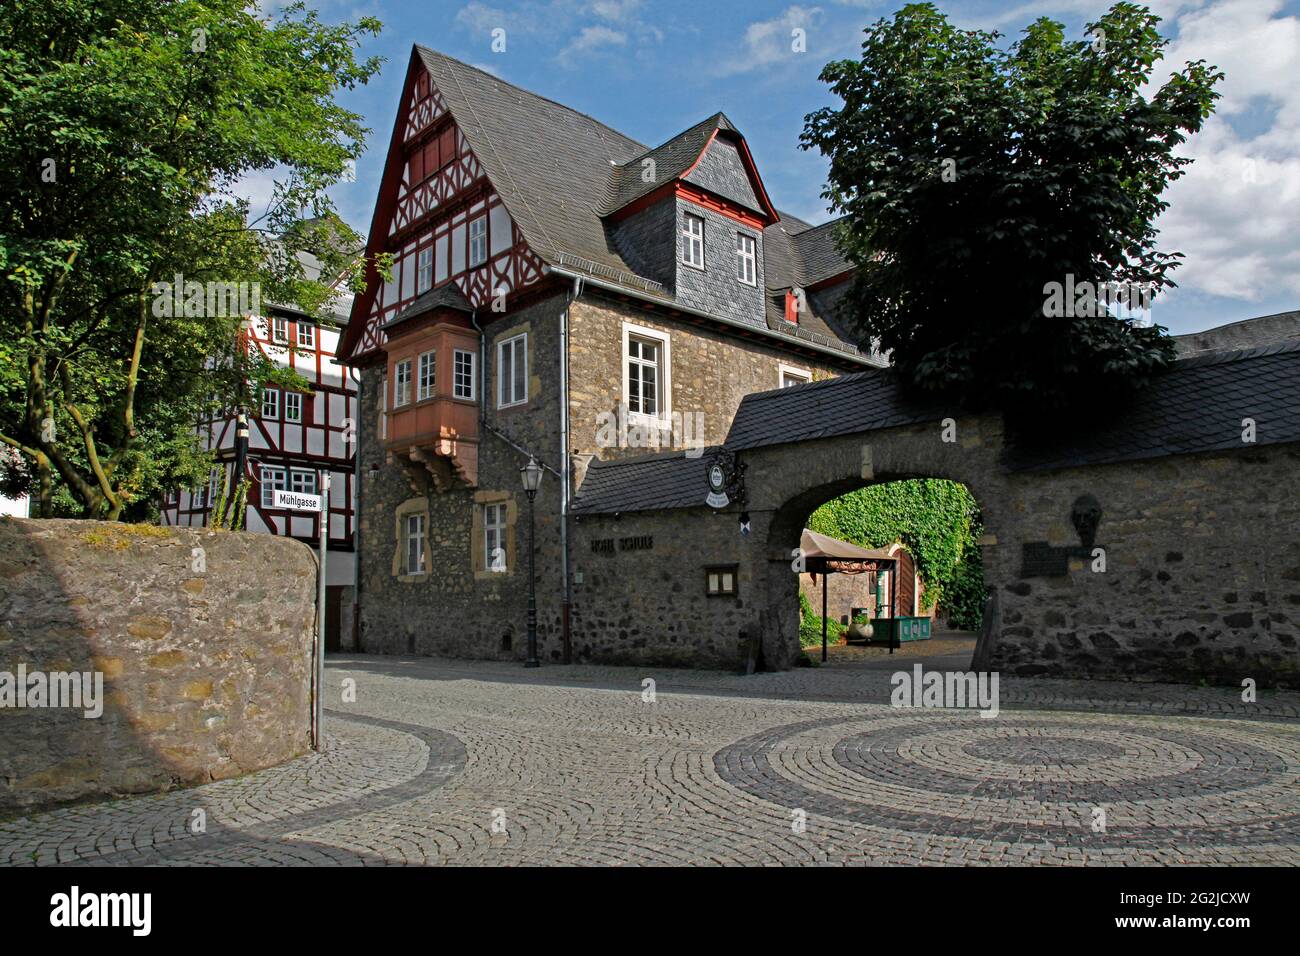 Museum, former high school, built 1591-99 over the foundations of the medieval town hall, Herborn, Hesse, Germany Stock Photo